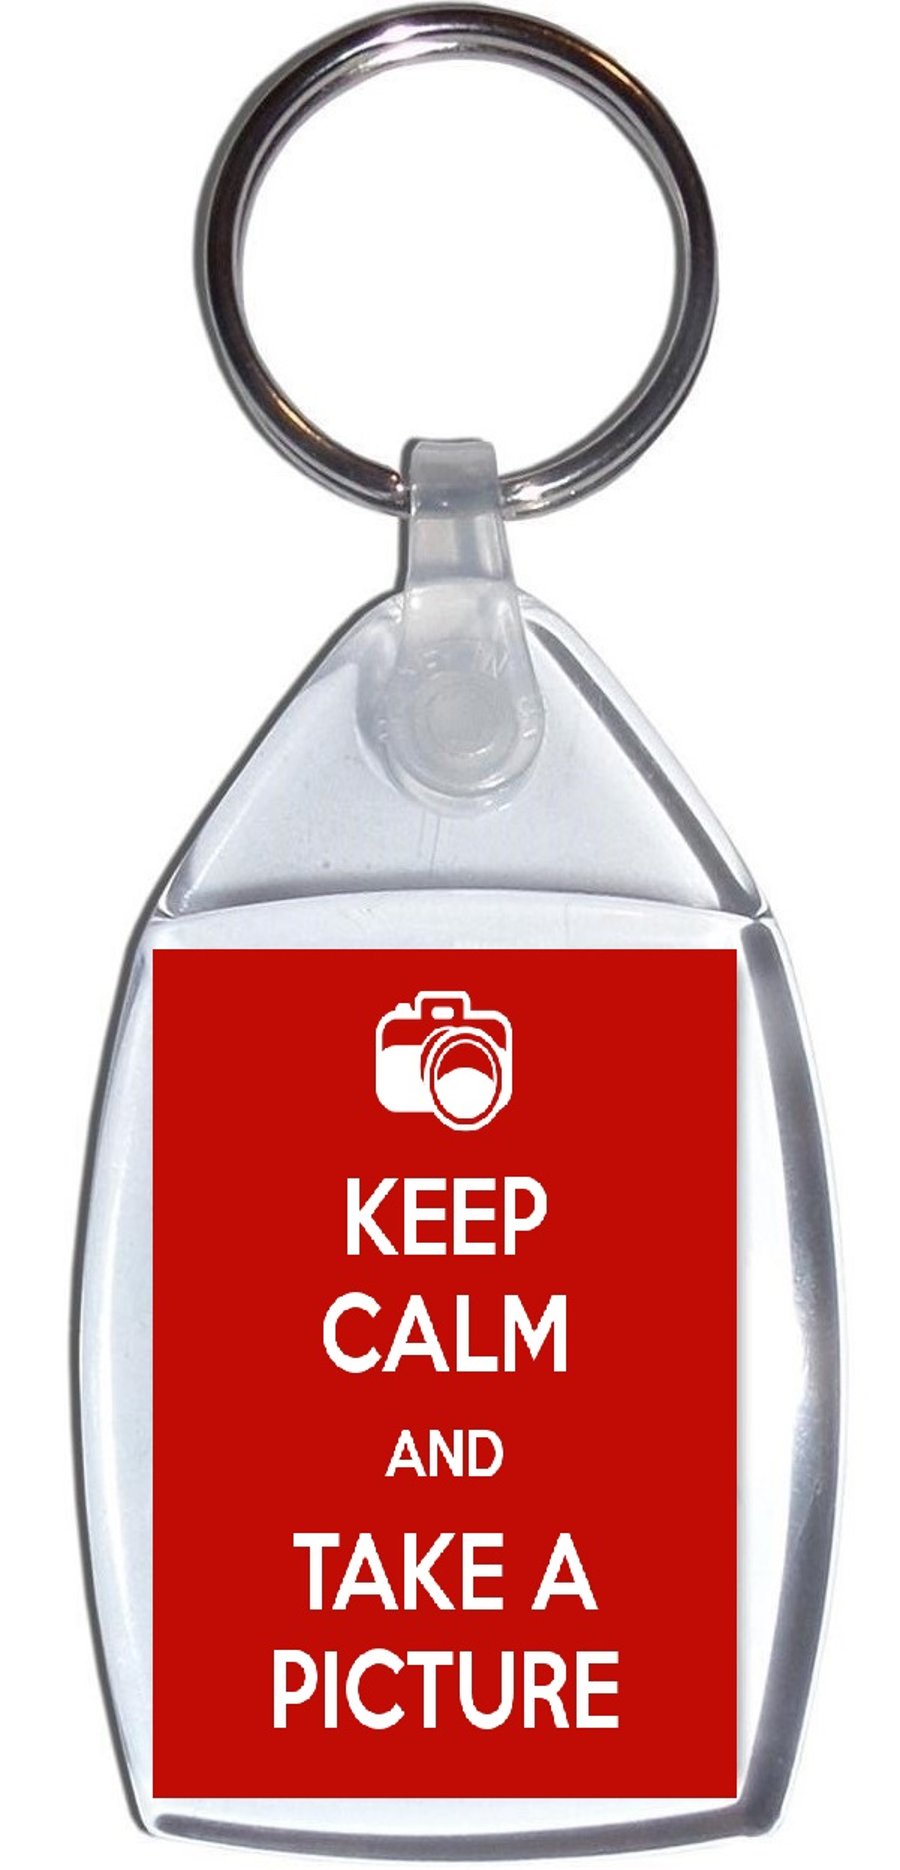 Keep Calm and Take a Picture - Keyring (FD0020e)